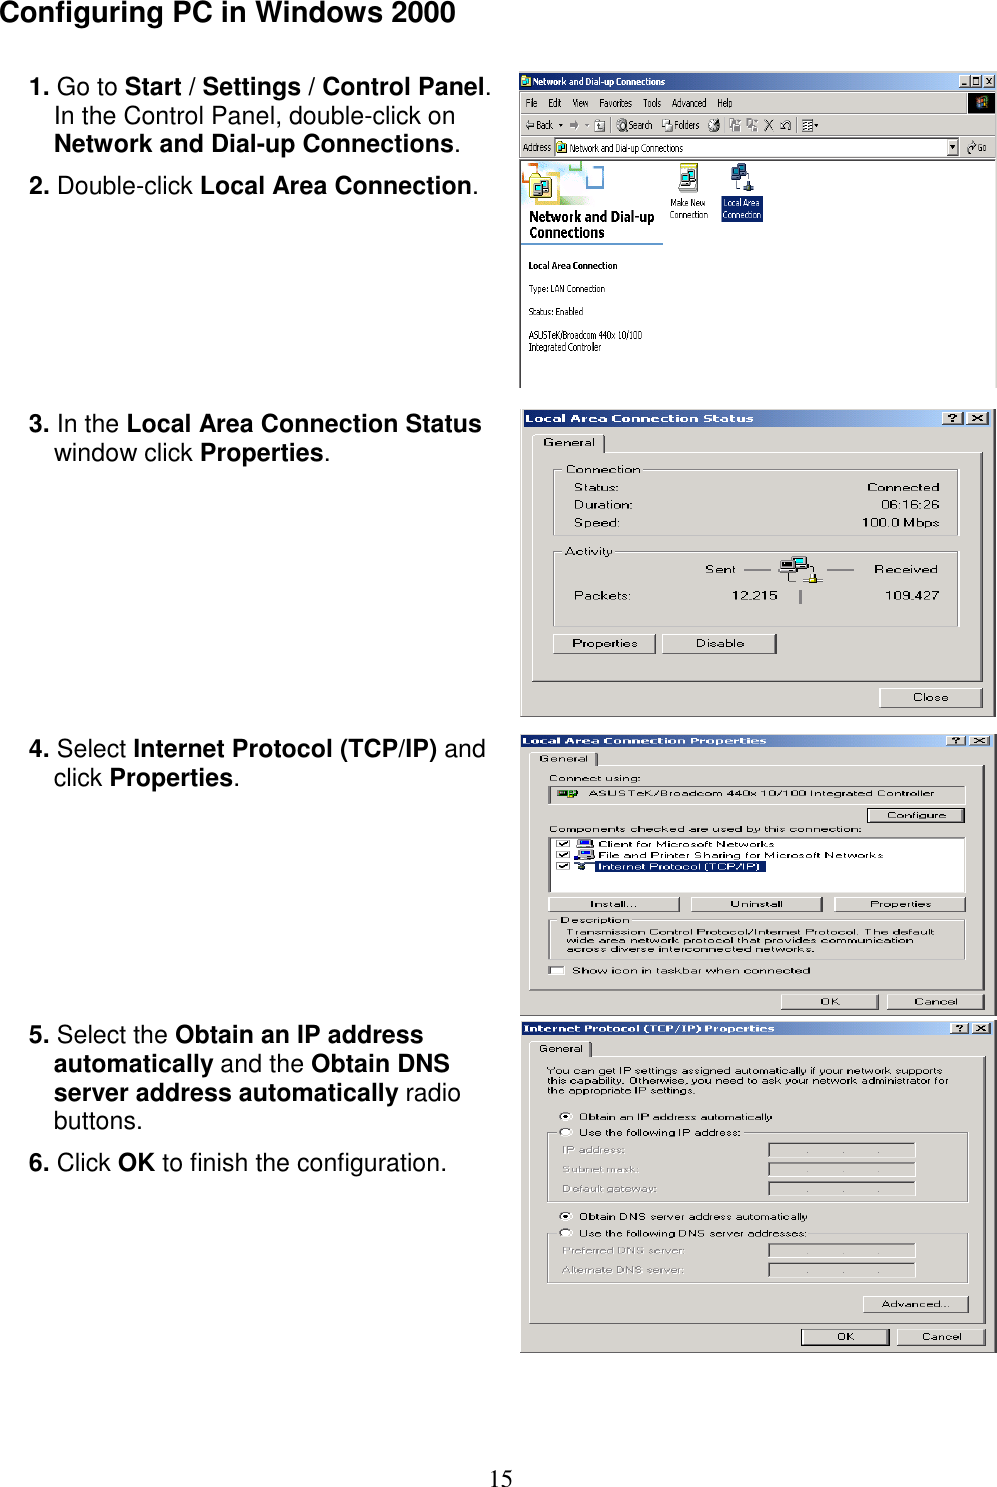 15 Configuring PC in Windows 2000  1. Go to Start / Settings / Control Panel. In the Control Panel, double-click on Network and Dial-up Connections. 2. Double-click Local Area Connection.   3. In the Local Area Connection Status window click Properties.  4. Select Internet Protocol (TCP/IP) and click Properties.  5. Select the Obtain an IP address automatically and the Obtain DNS server address automatically radio buttons. 6. Click OK to finish the configuration.     